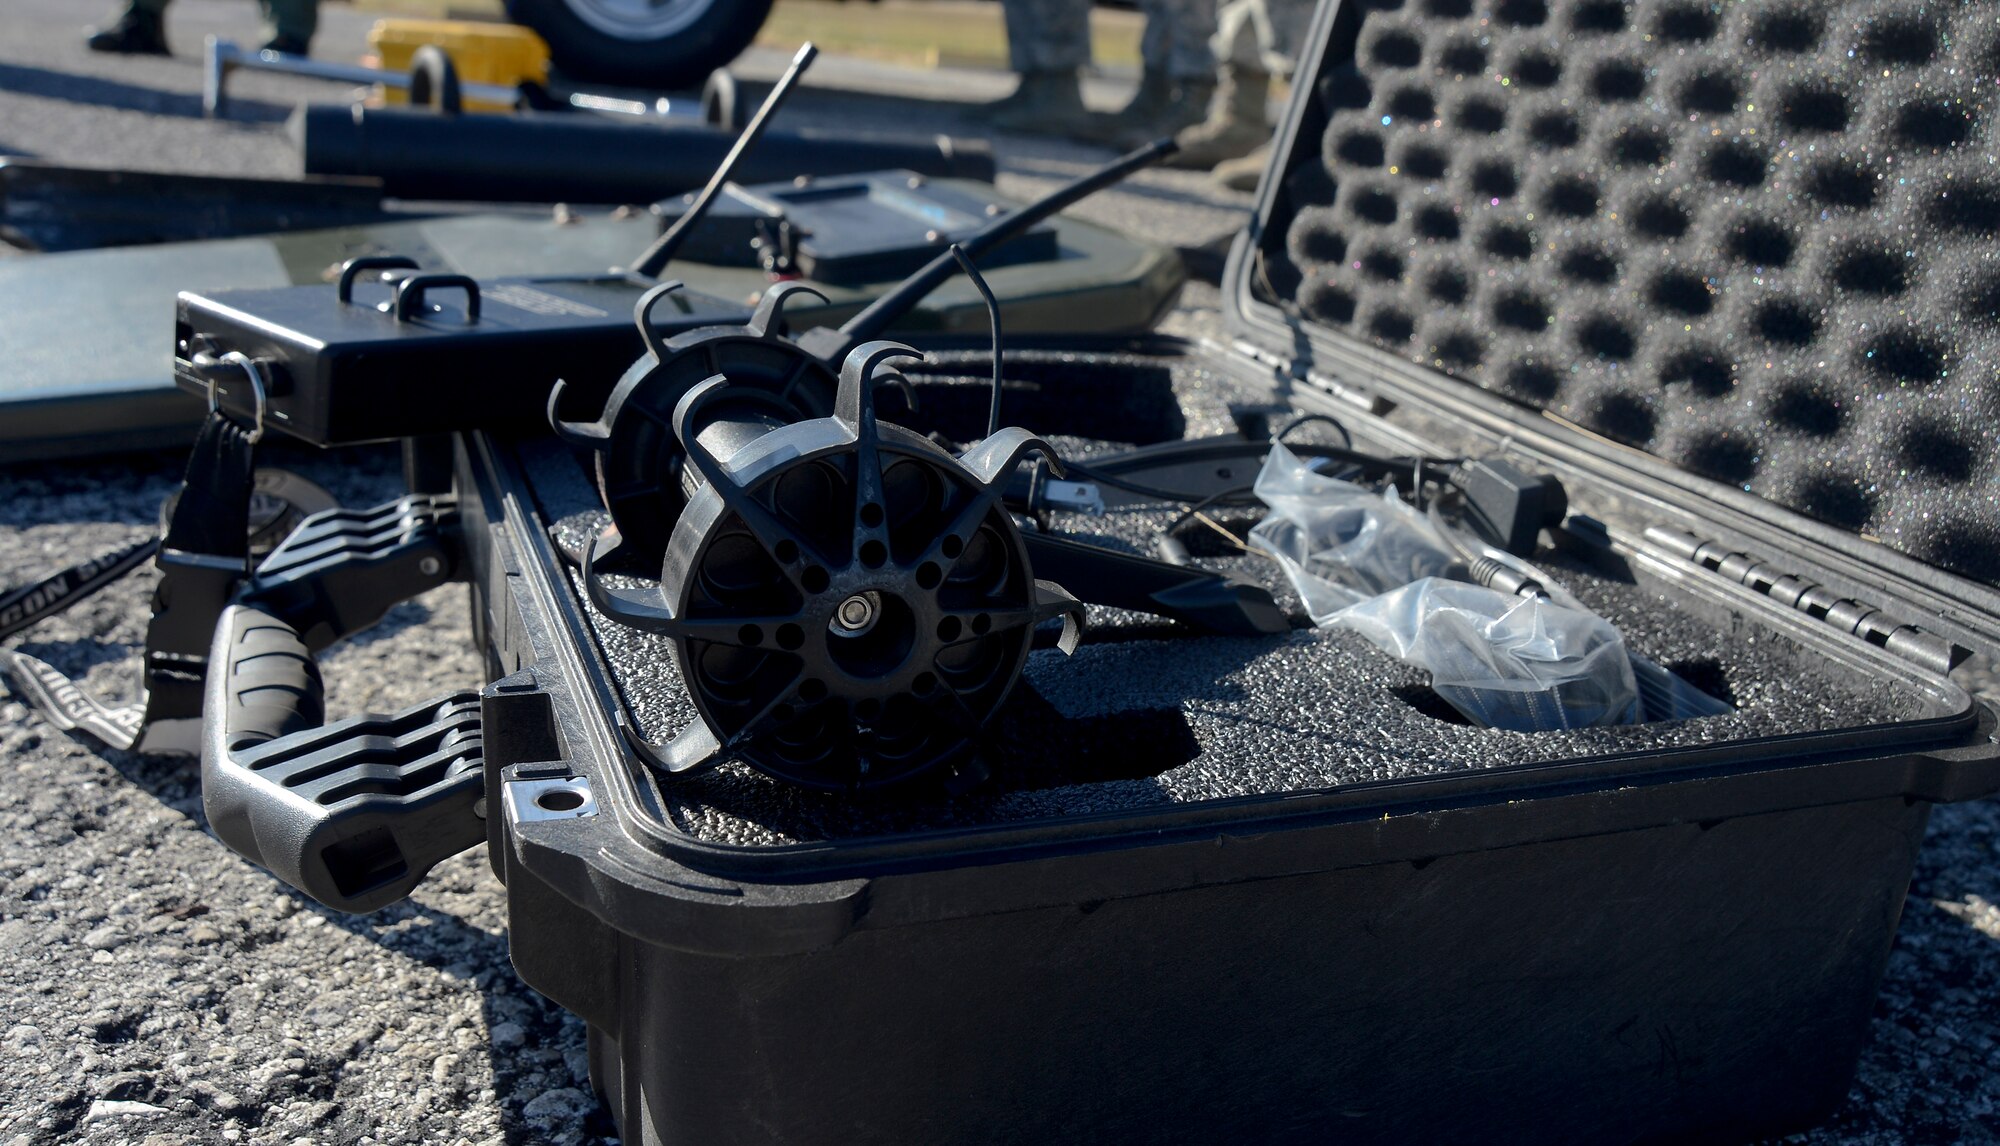 Special weapons and tactical (SWAT) team equipment lay out for display during an immersion, Nov. 21, 2016 at MacDill Air Force Base, Fla. During the immersion, the 6th Security Forces Squadron demonstrated the capabilities of their SWAT and emergency services teams. (U.S. Air Force photo by Senior Airman Jenay Randolph)